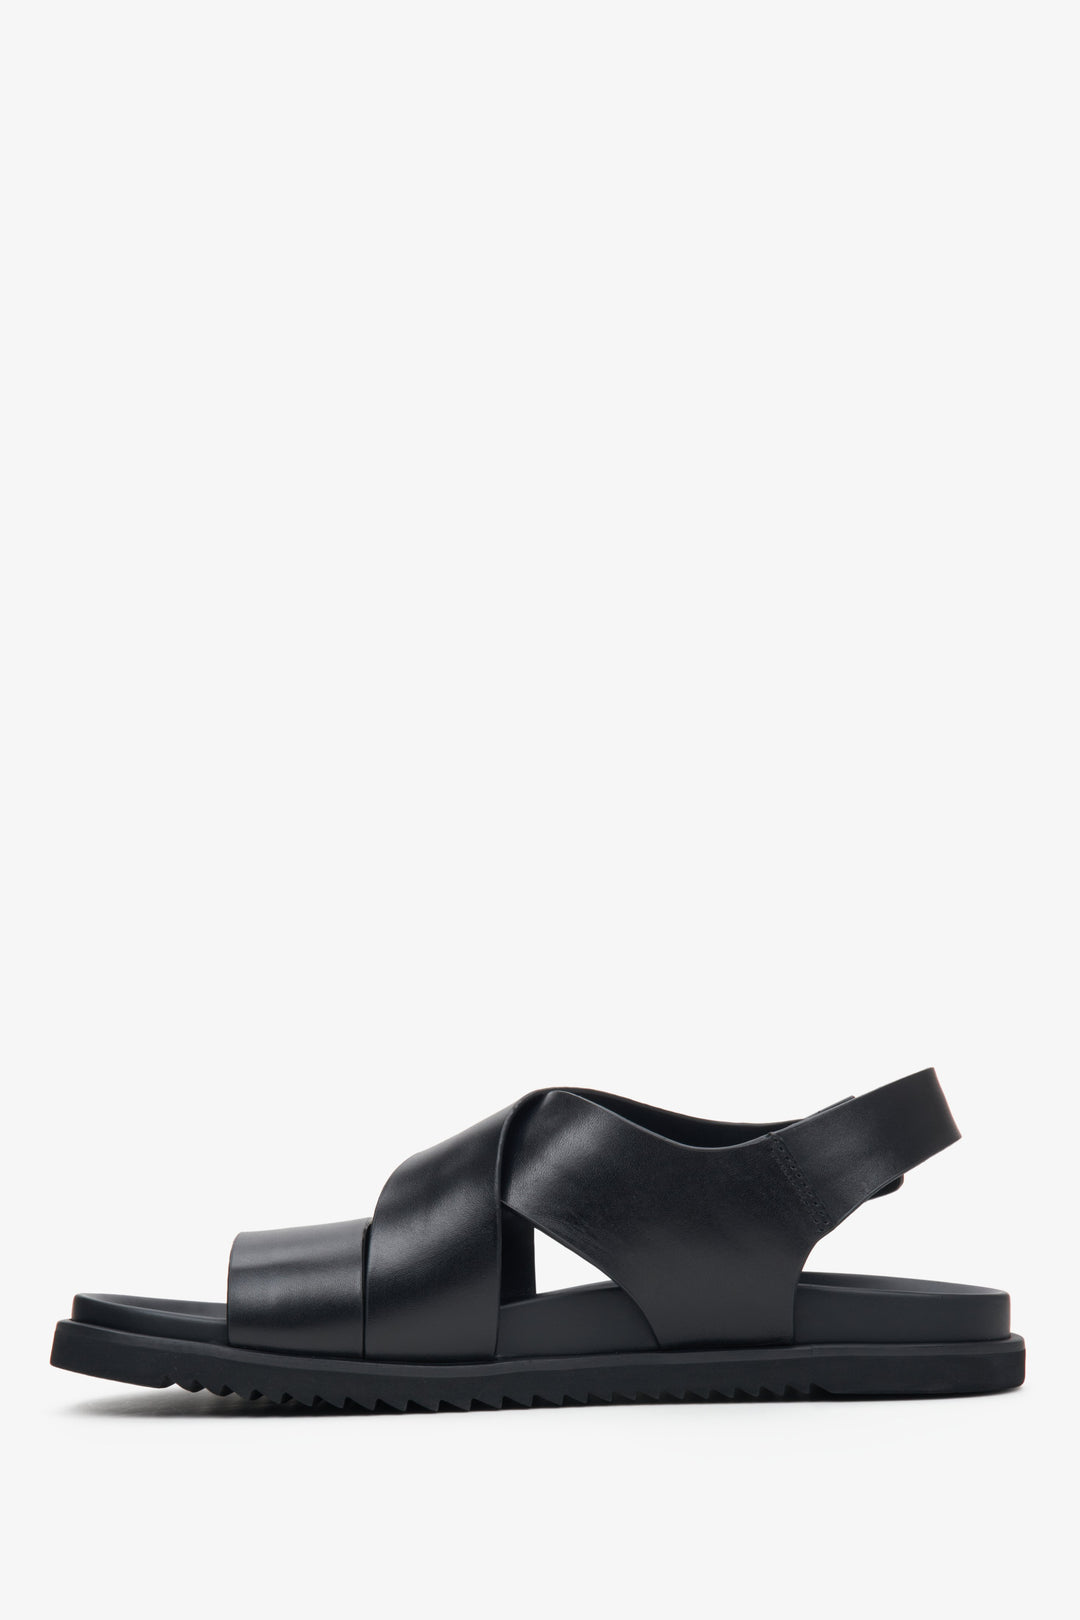 Men's black sandals made of genuine and eco leather with thick, crisscrossed straps for summer.